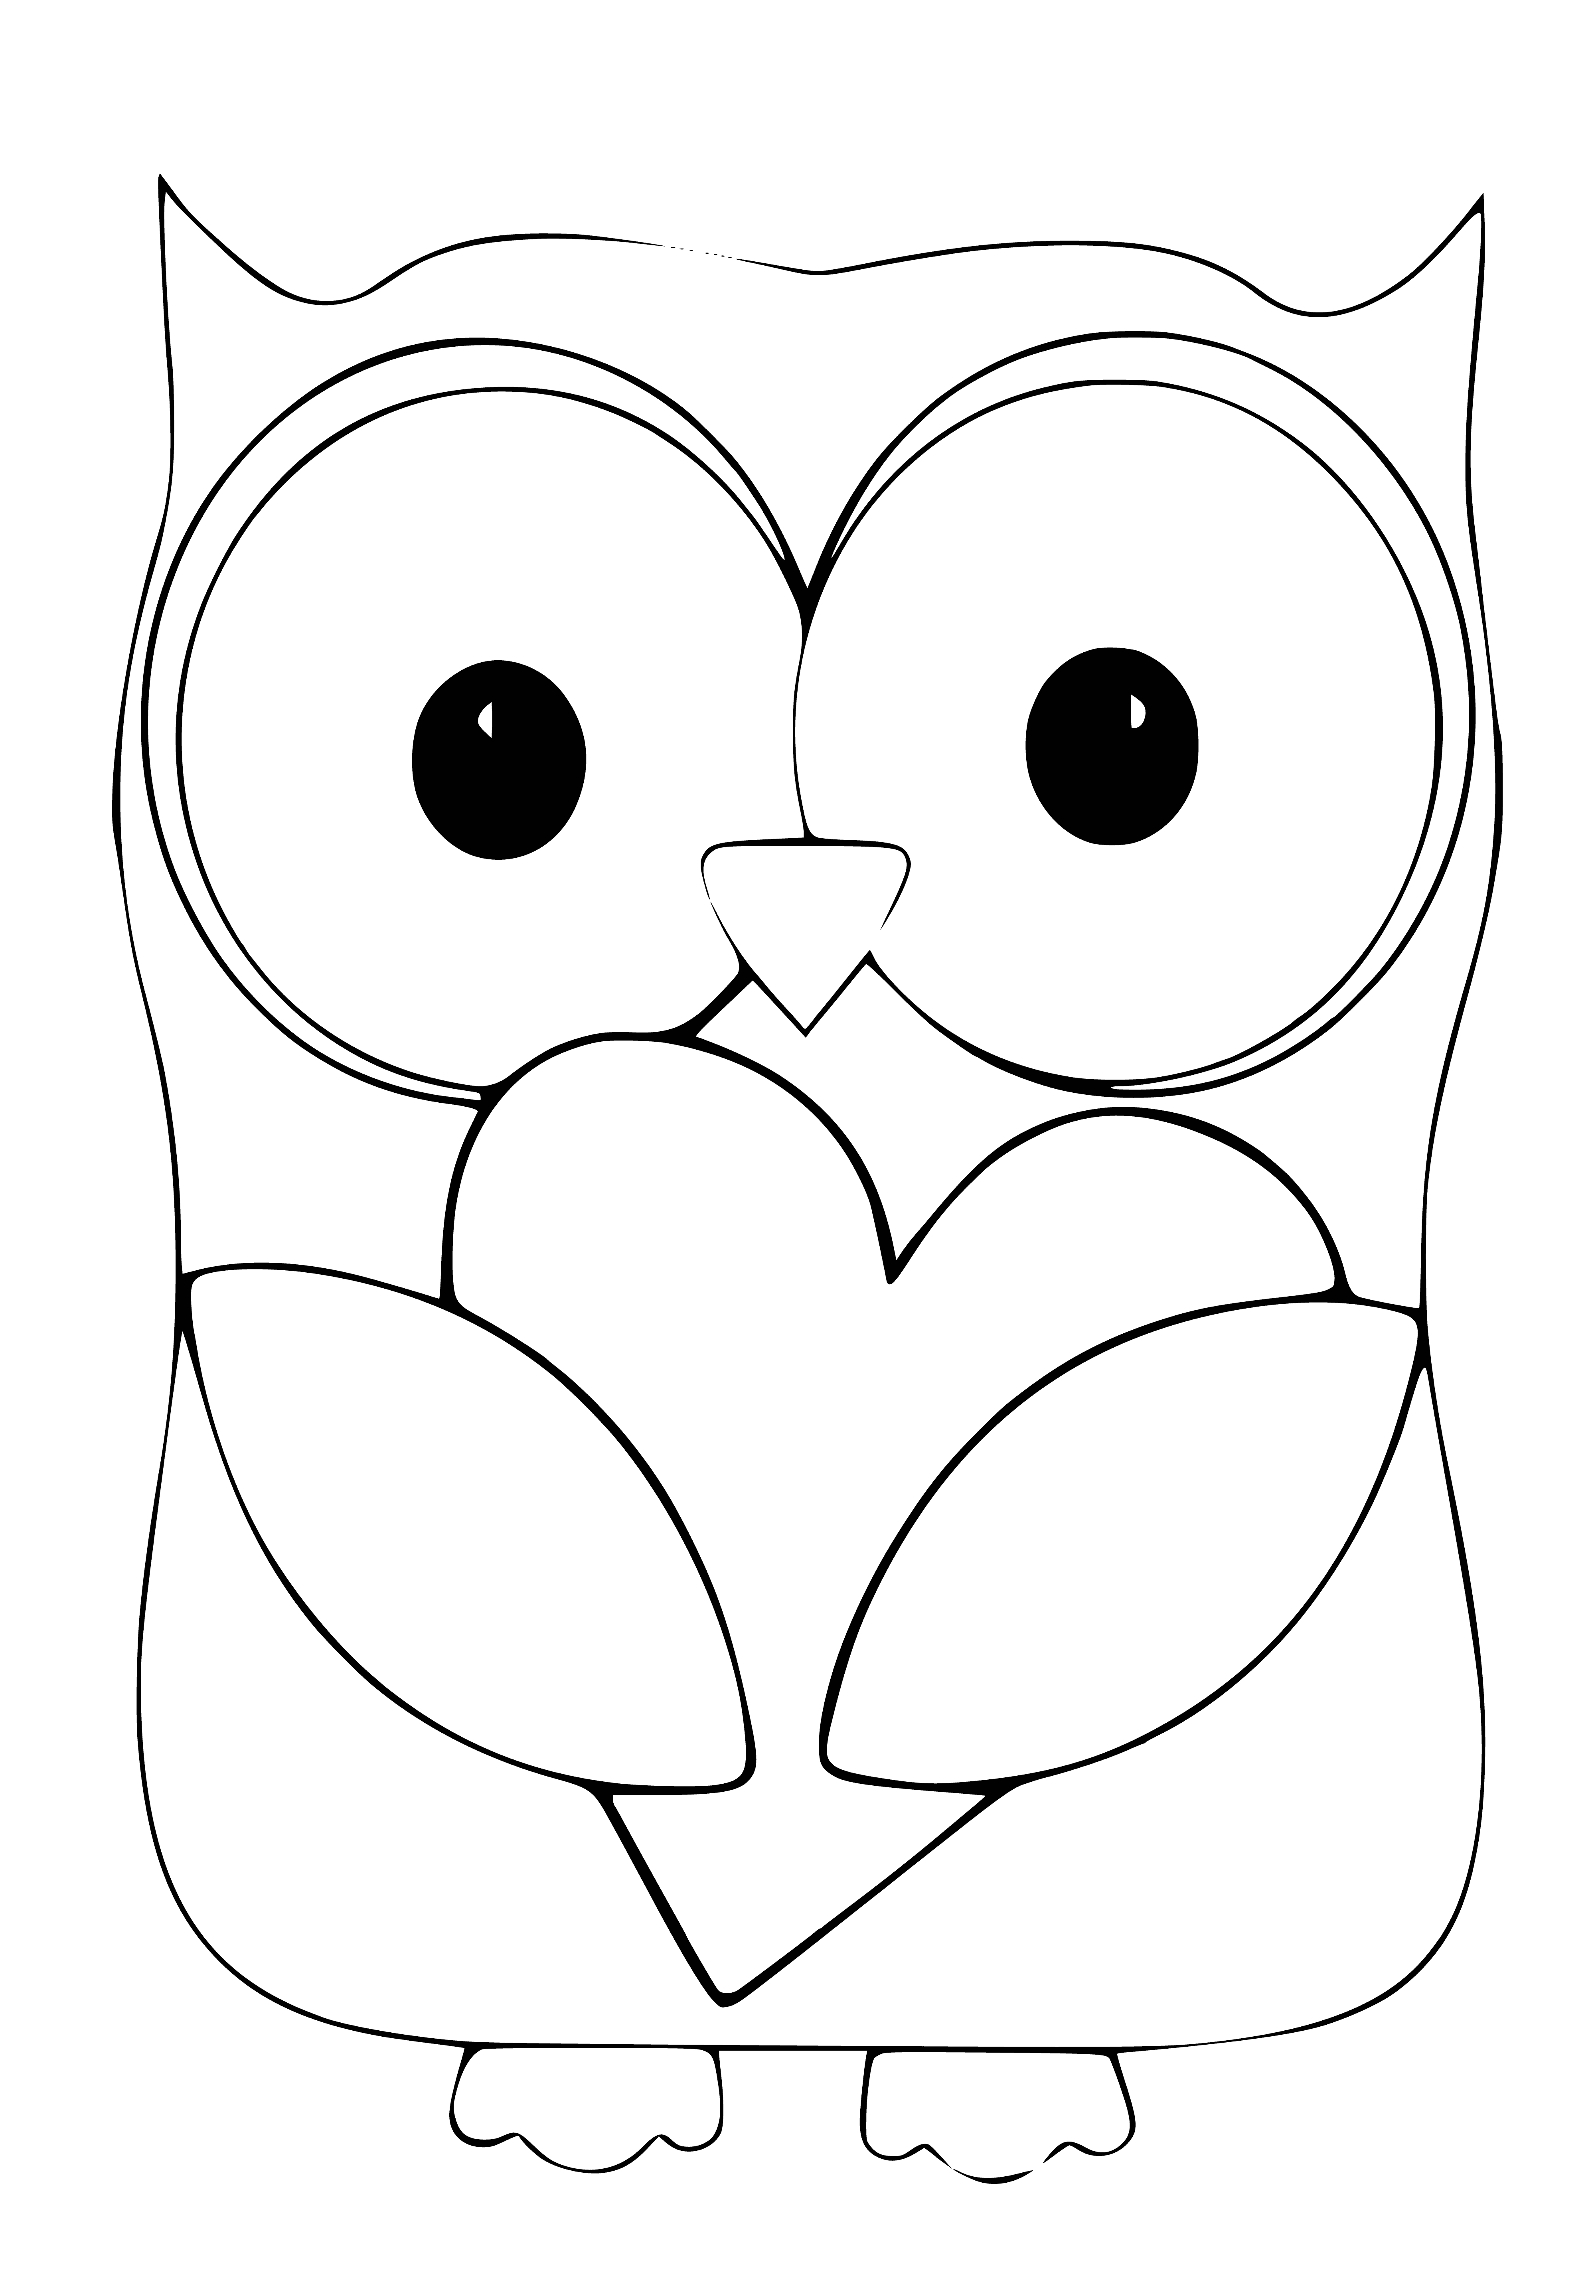 coloring page: Brown owl with blue eyes holds red heart; behind it looms large red heart.